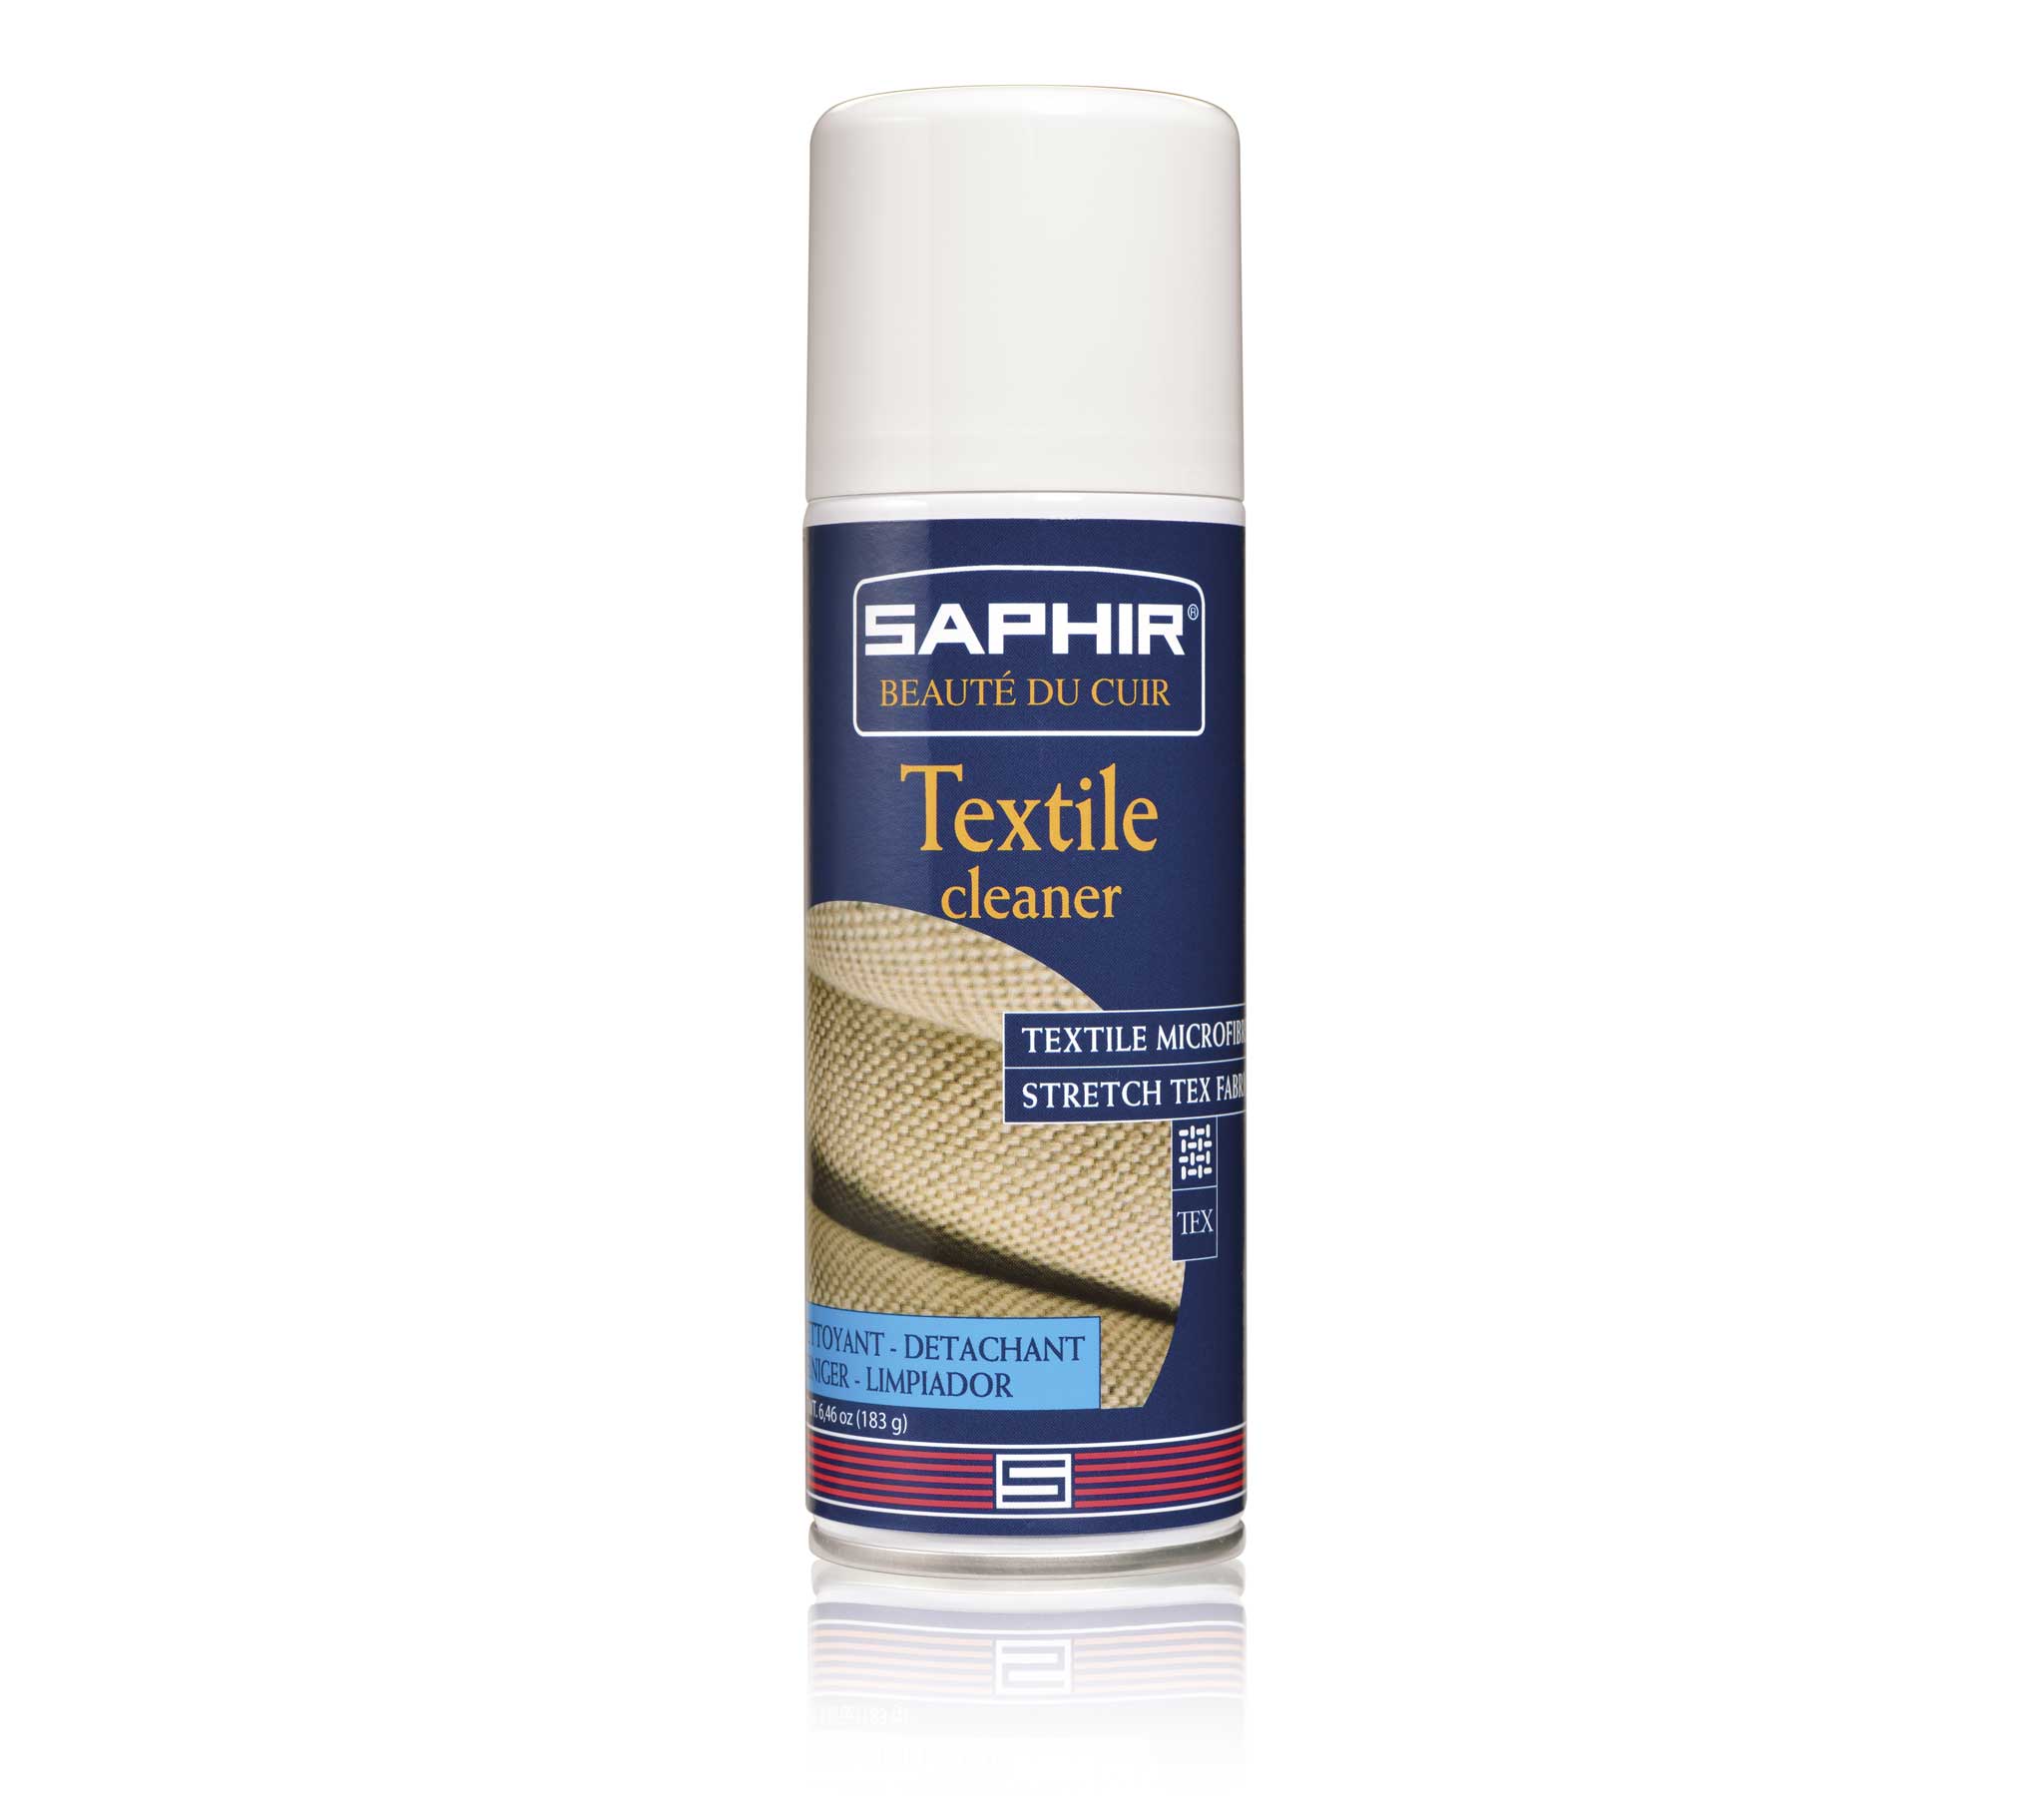 Textile Cleaner